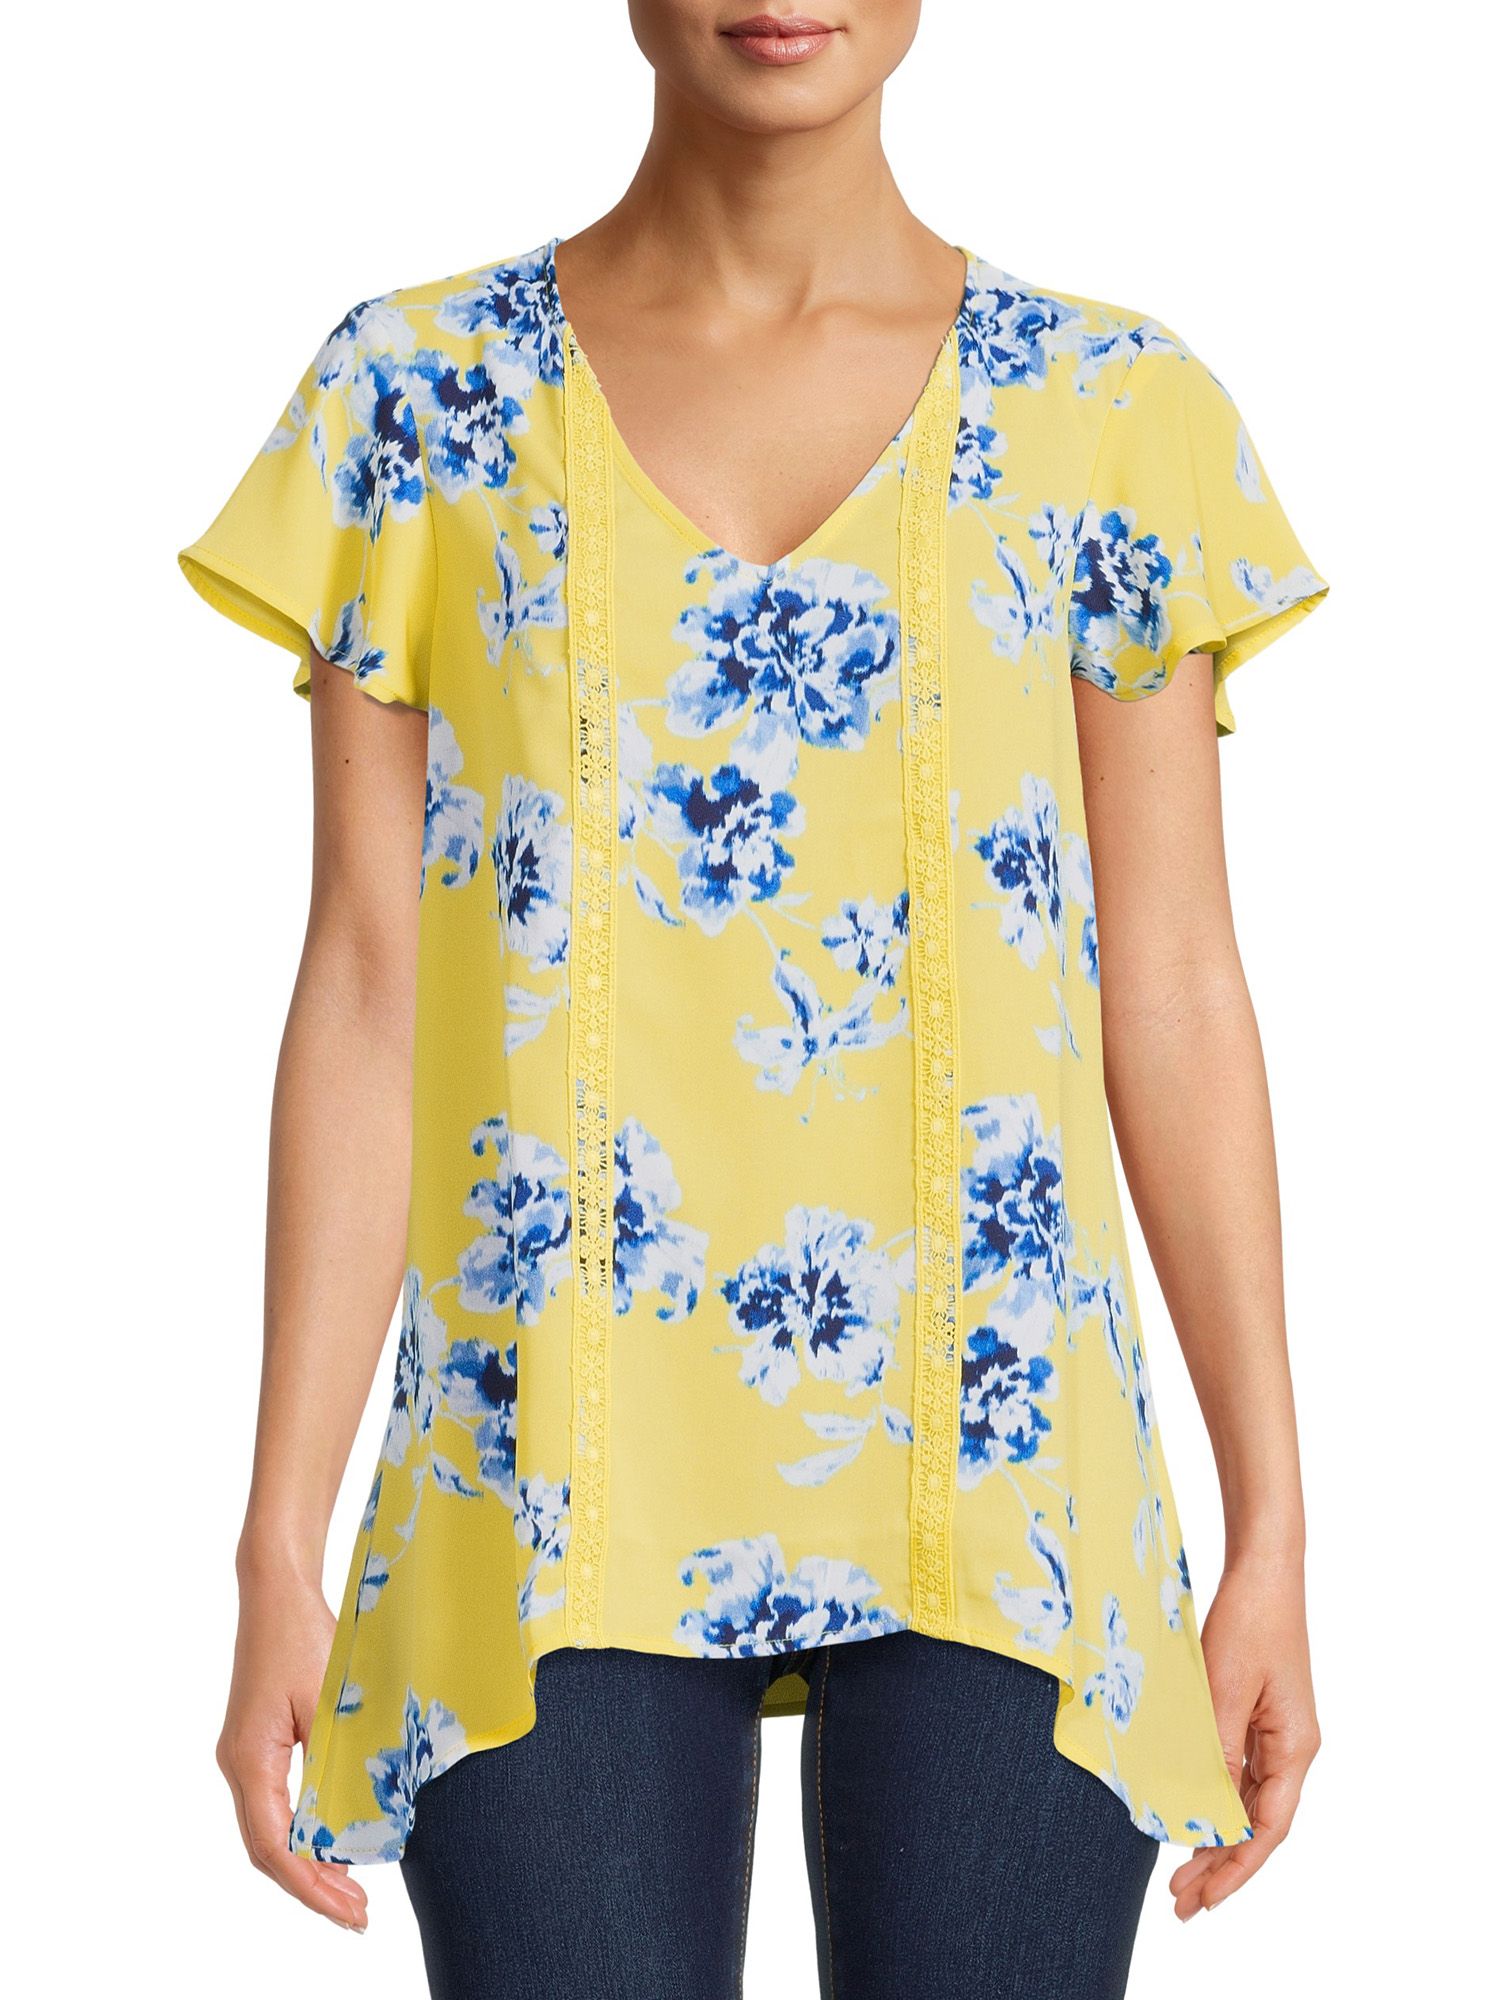 The Pioneer Woman Scoop-Neck Tunic with Short Sleeves